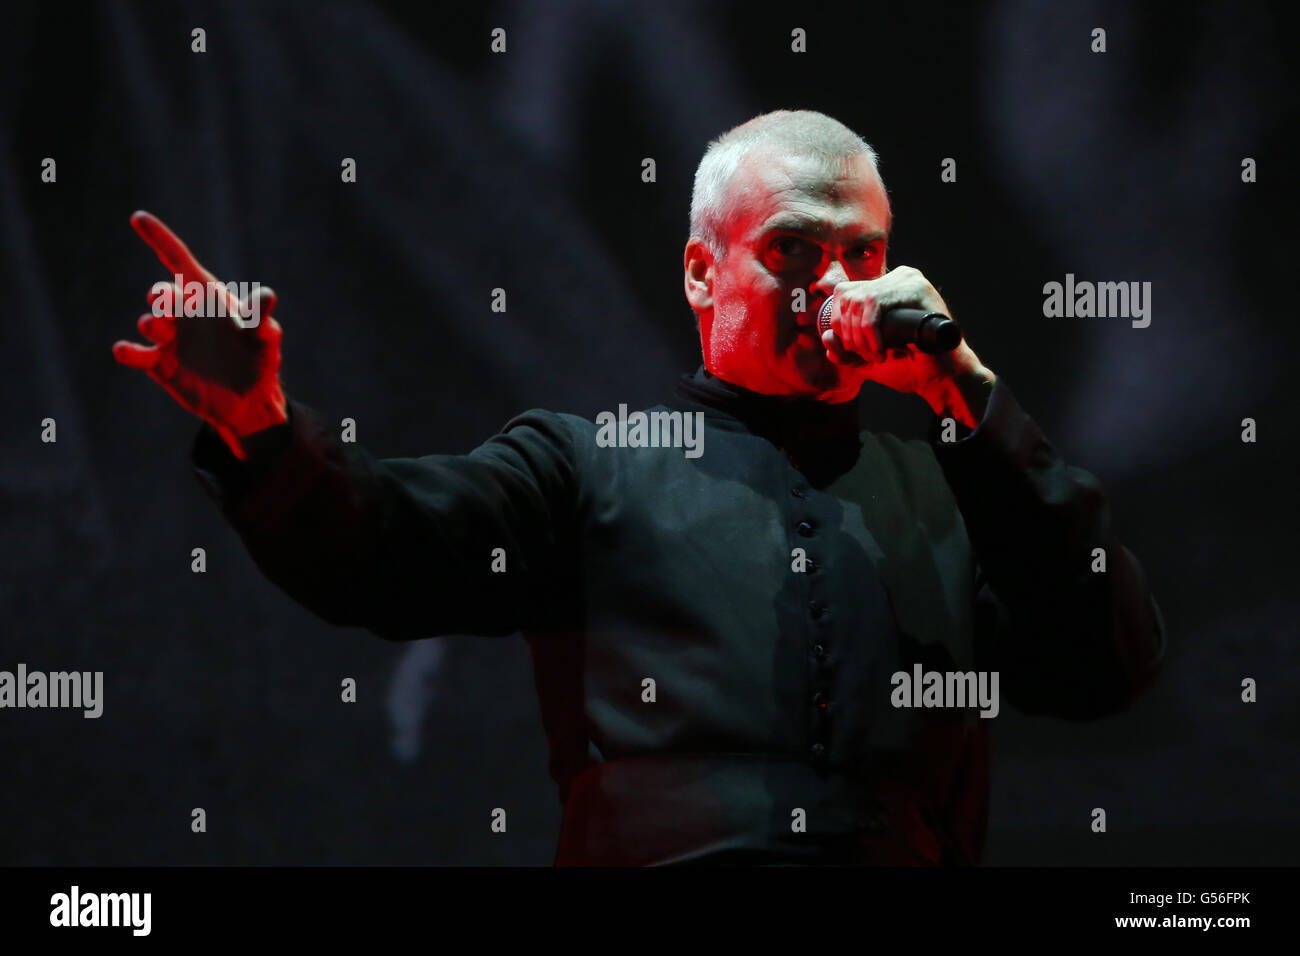 Zagreb, Croatia. 20th June, 2016. : Gutterdämmerung featuring Henry Rollins, accompanied by a live rock 'n' roll band performs on the Main stage during the first day of 11th INmusic festival located on the lake Jarun in Zagreb, Croatia. Gutterdämmerung is a new rock ‘n’ roll / film / gig concept from the mind of Belgian-Swedish visual artist Bjorn Tagemose. Gutterdämmerung is part rock show part immersive cinema experience featuring some of the biggest rock names on the planet including Grace Jones, Iggy Pop, Henry Rollins, Eagles Of Death Metal’s Jesse Hughes, Motörhead’s Lemmy, Tom Araya, Ma Stock Photo